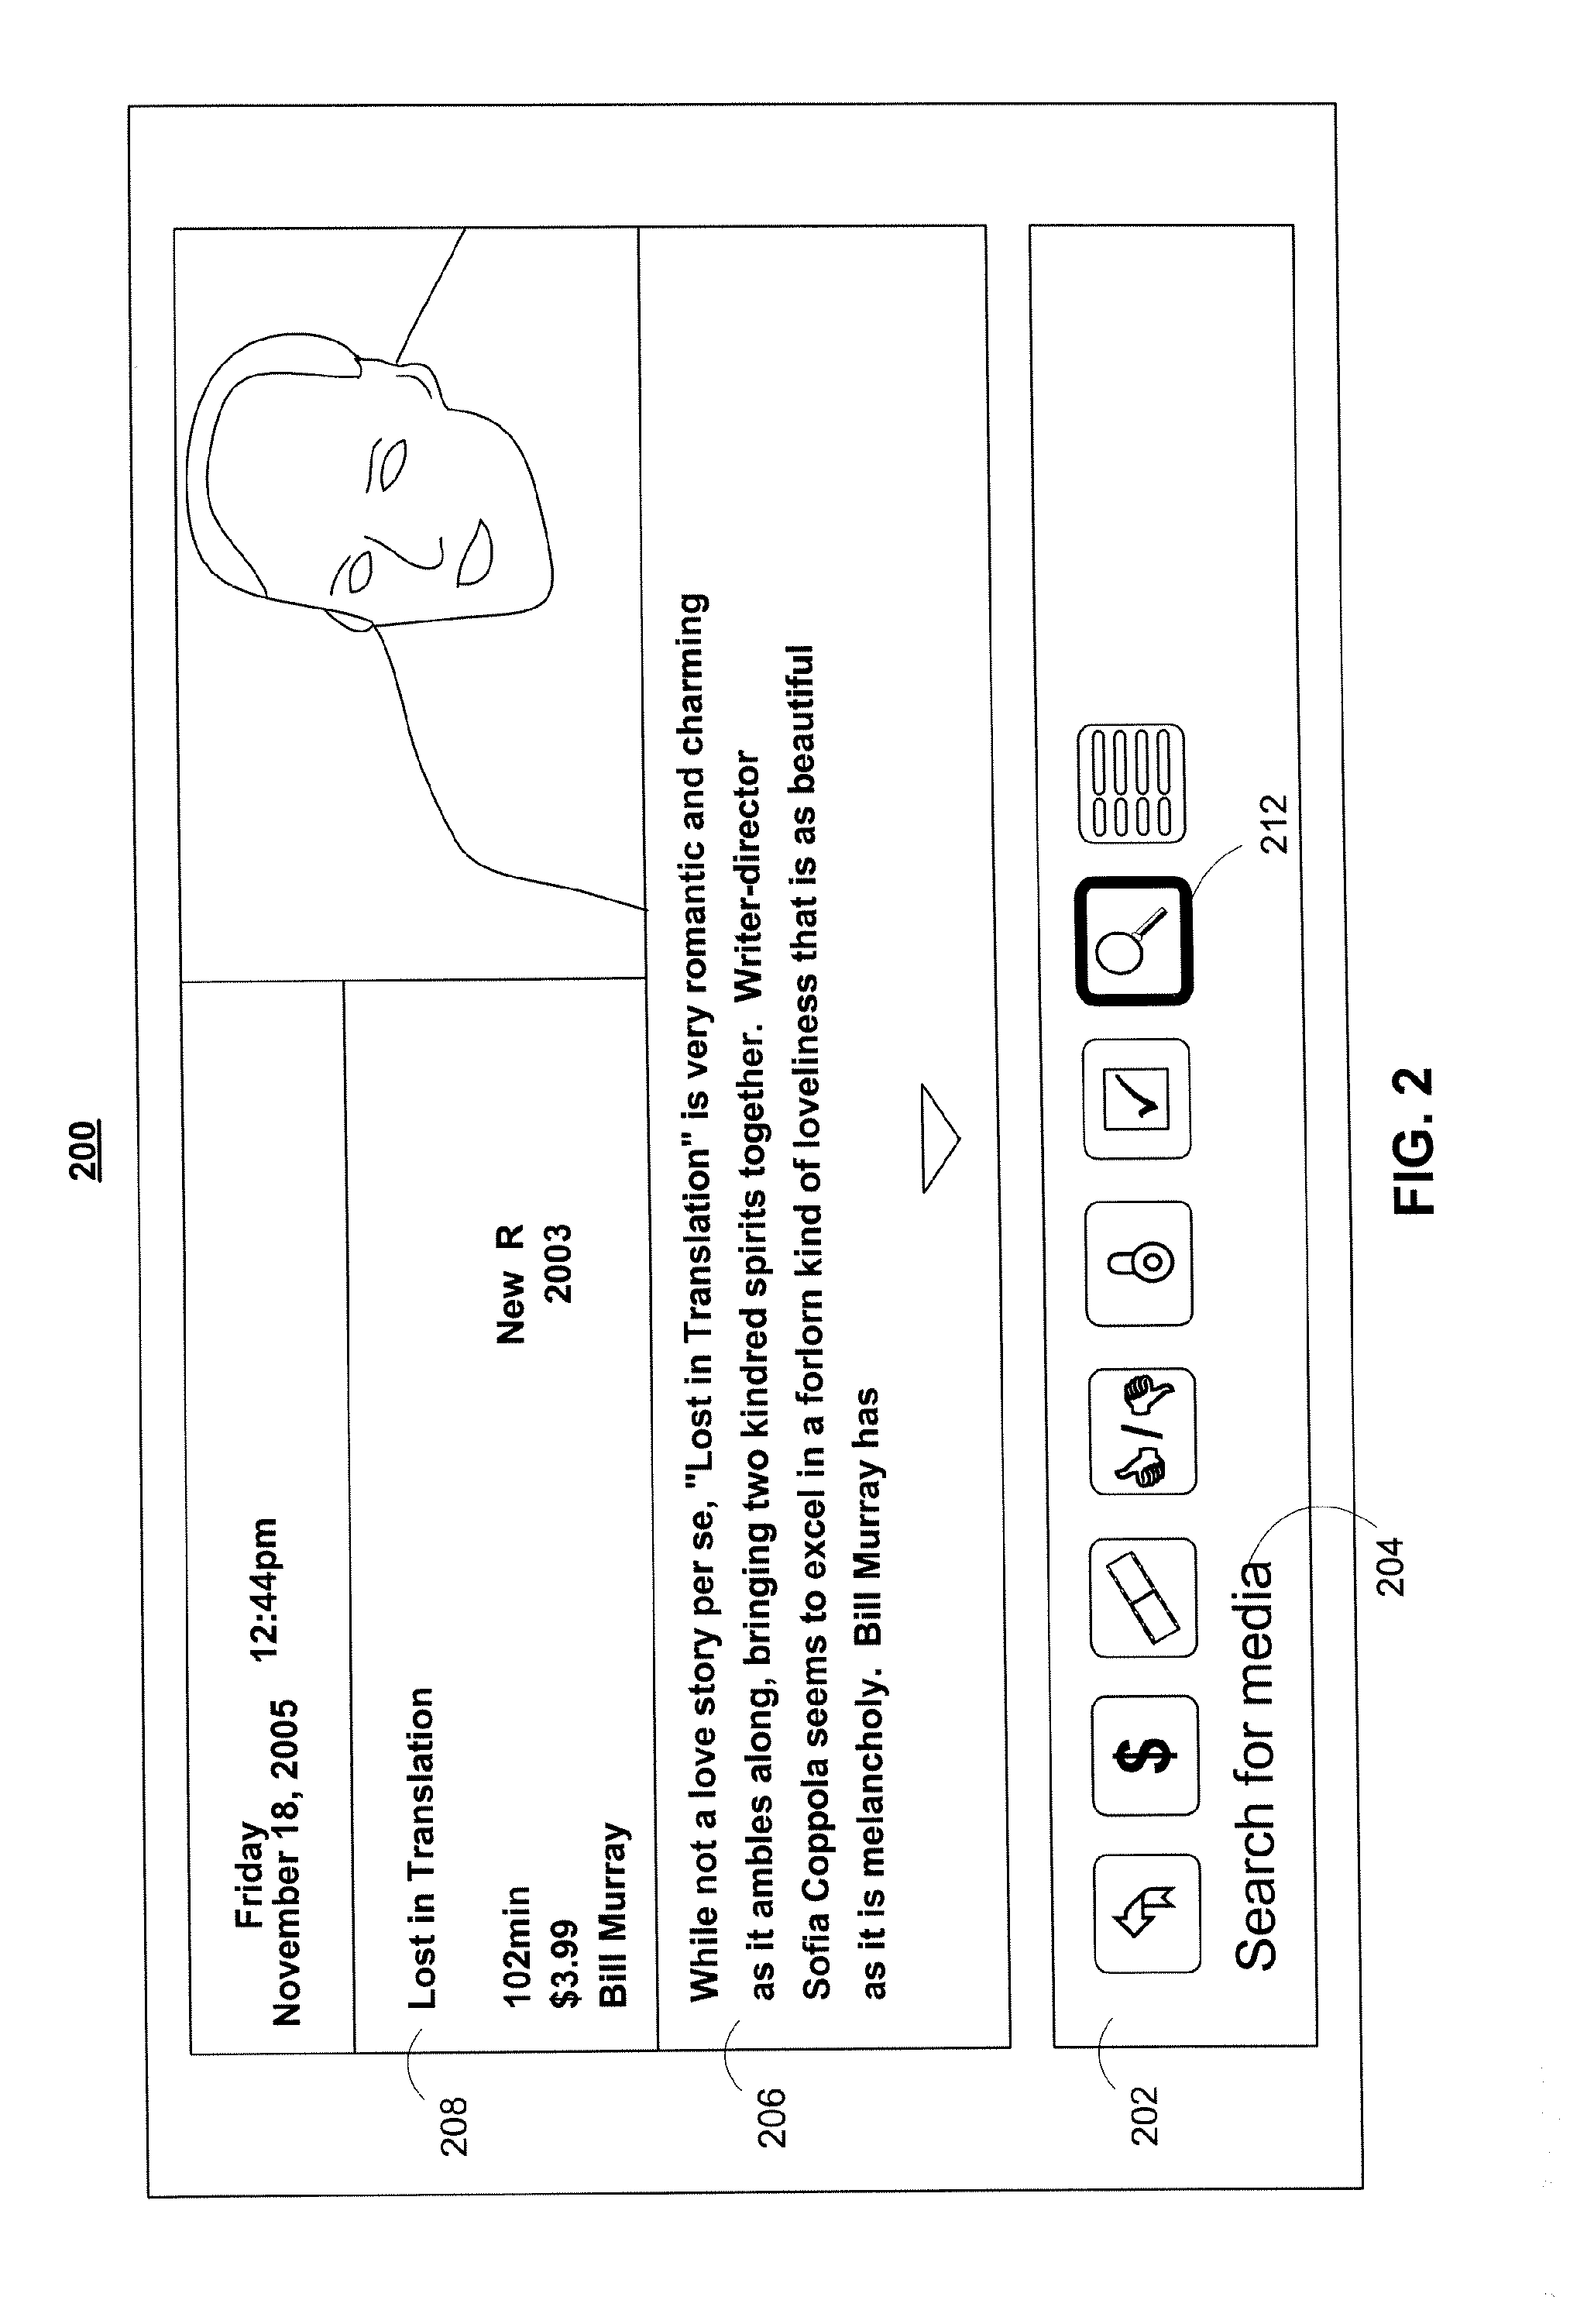 Systems and methods for interacting with advanced displays provided by an interactive media guidance application